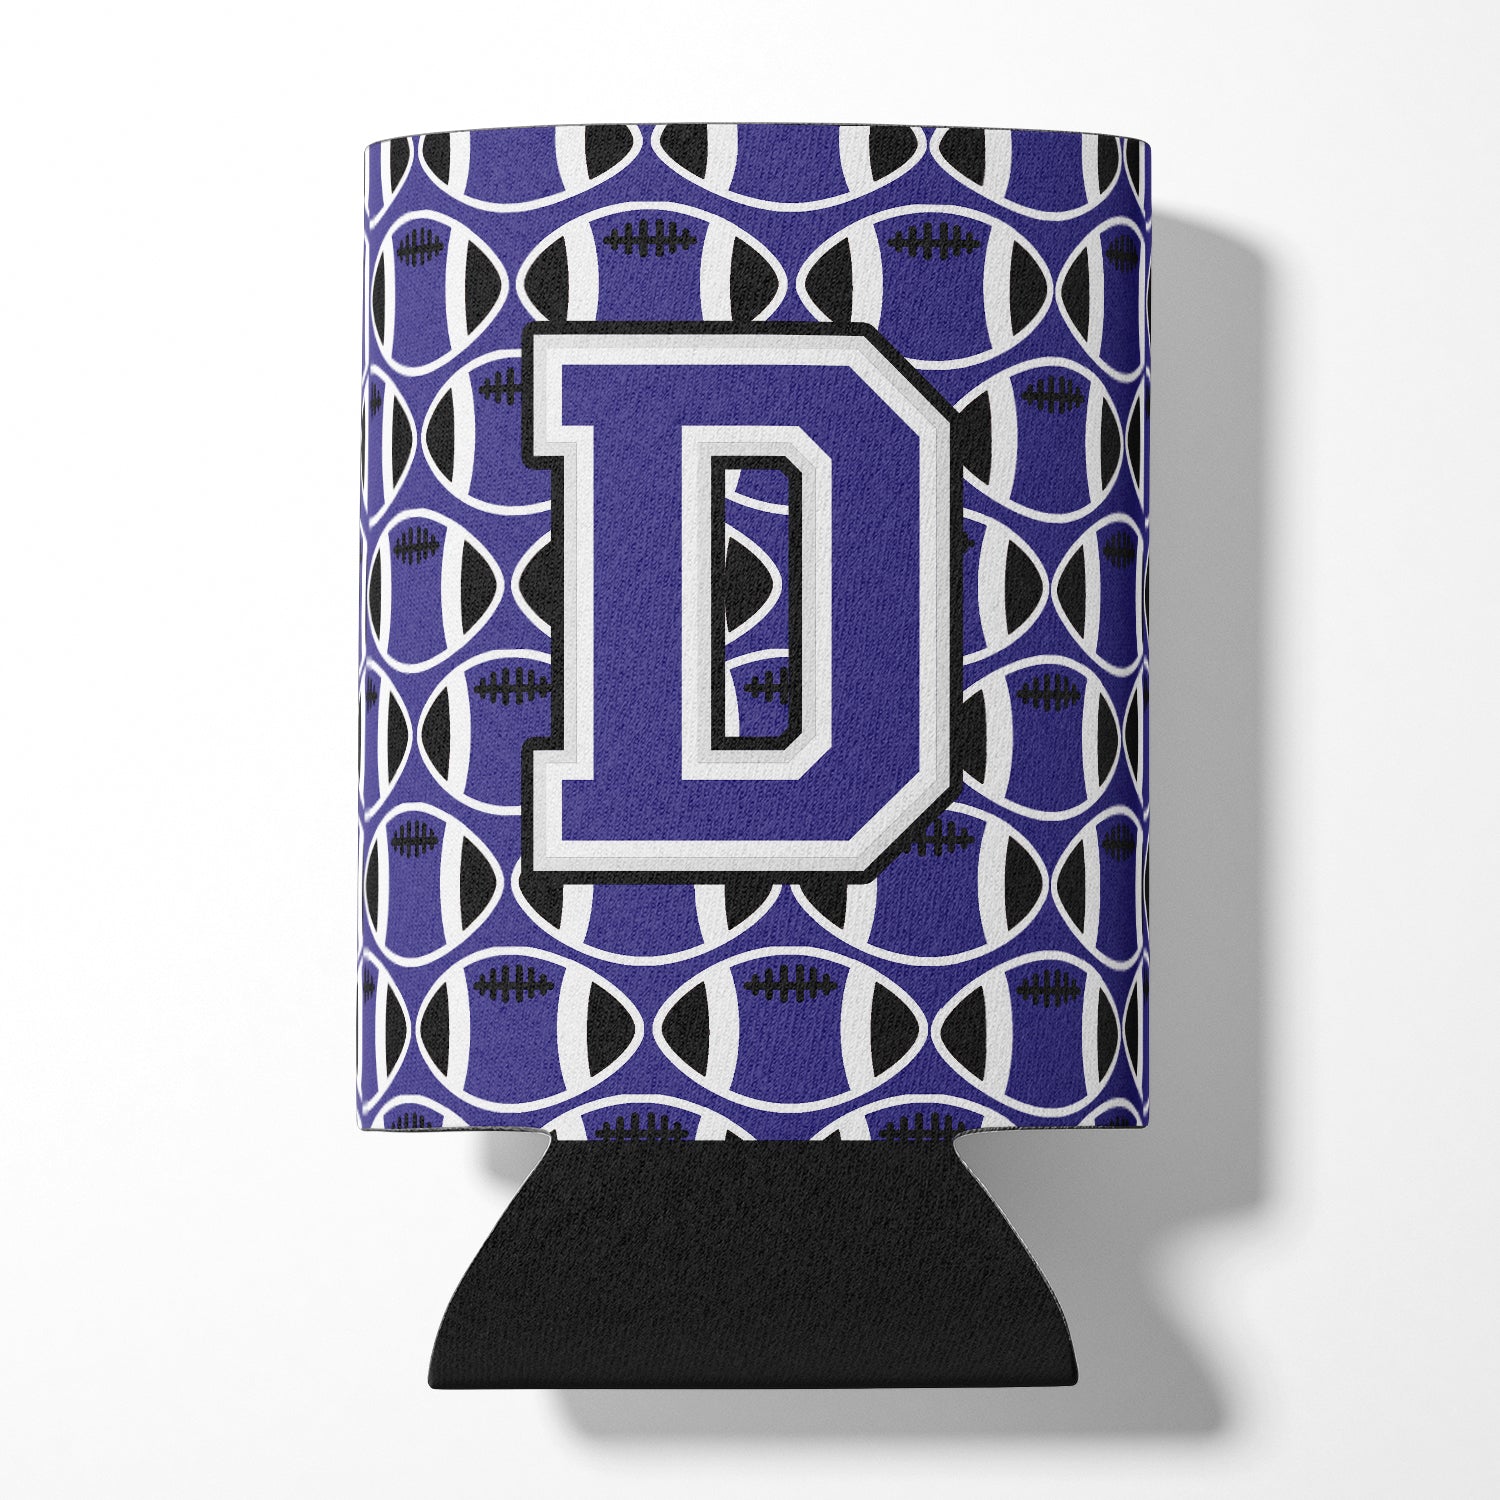 Letter D Football Purple and White Can or Bottle Hugger CJ1068-DCC.